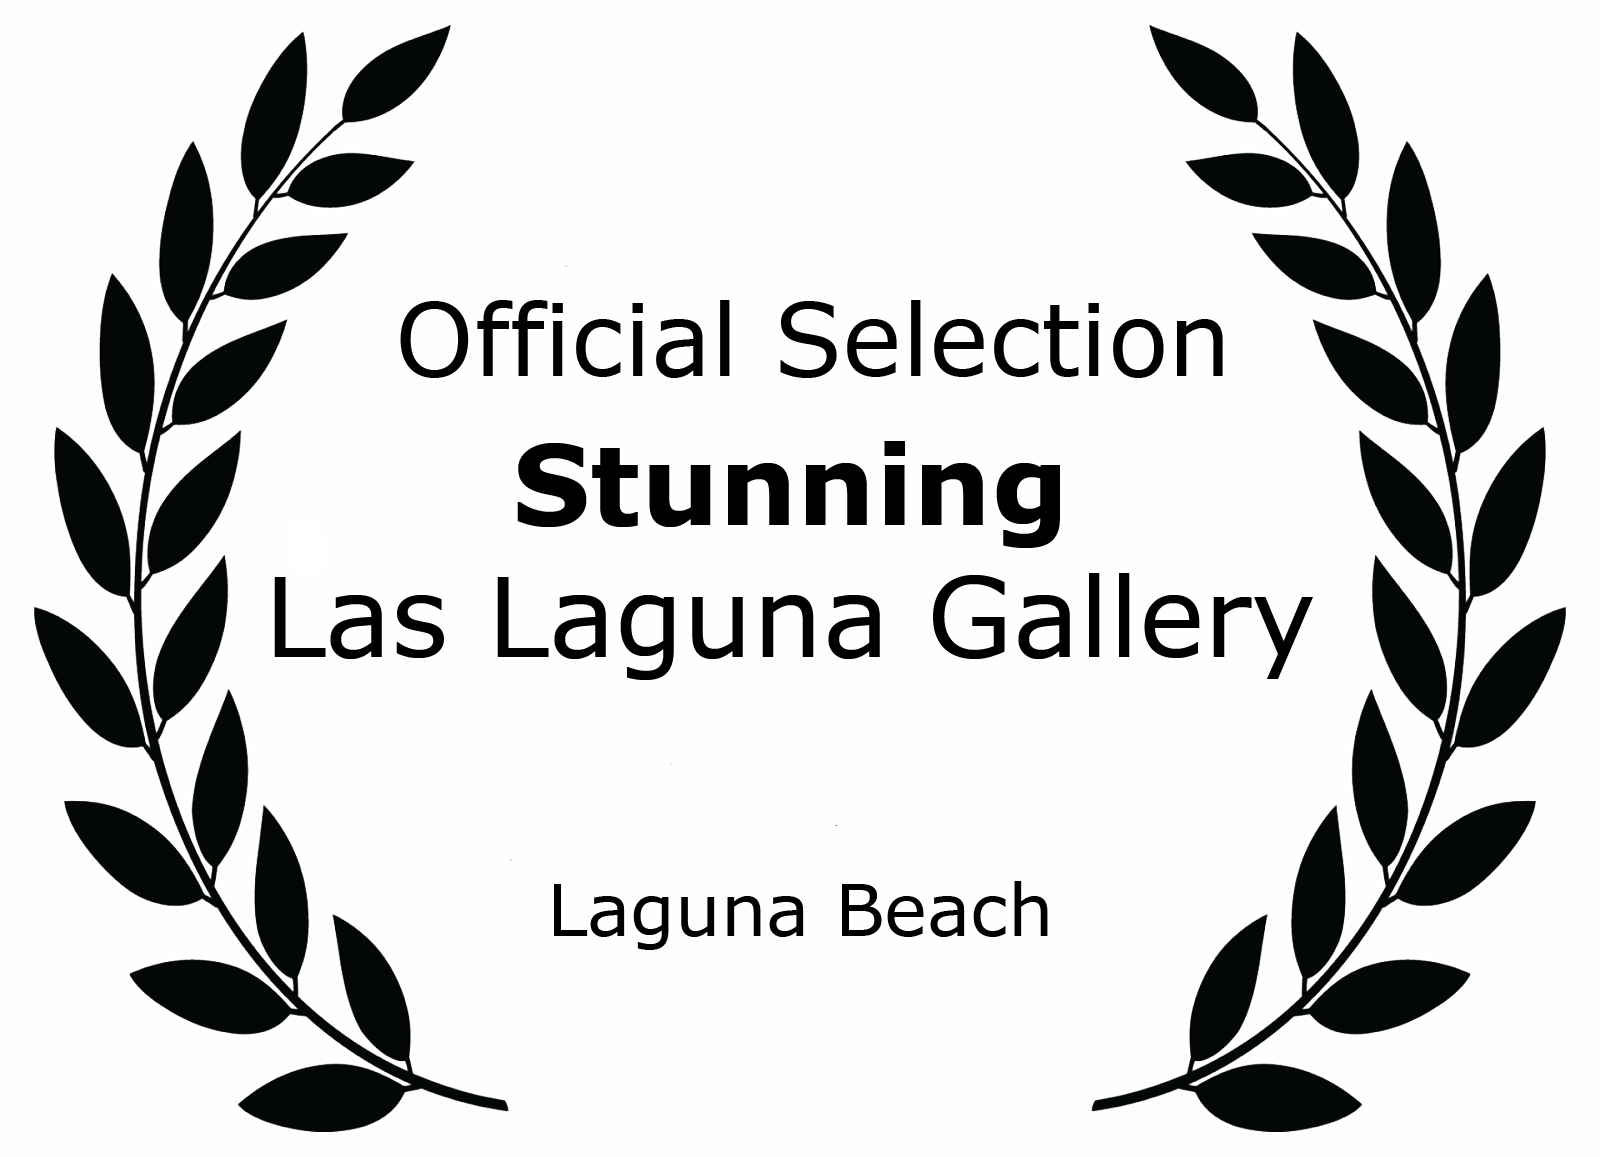 Official Selection Stunning Las Laguna Gallery